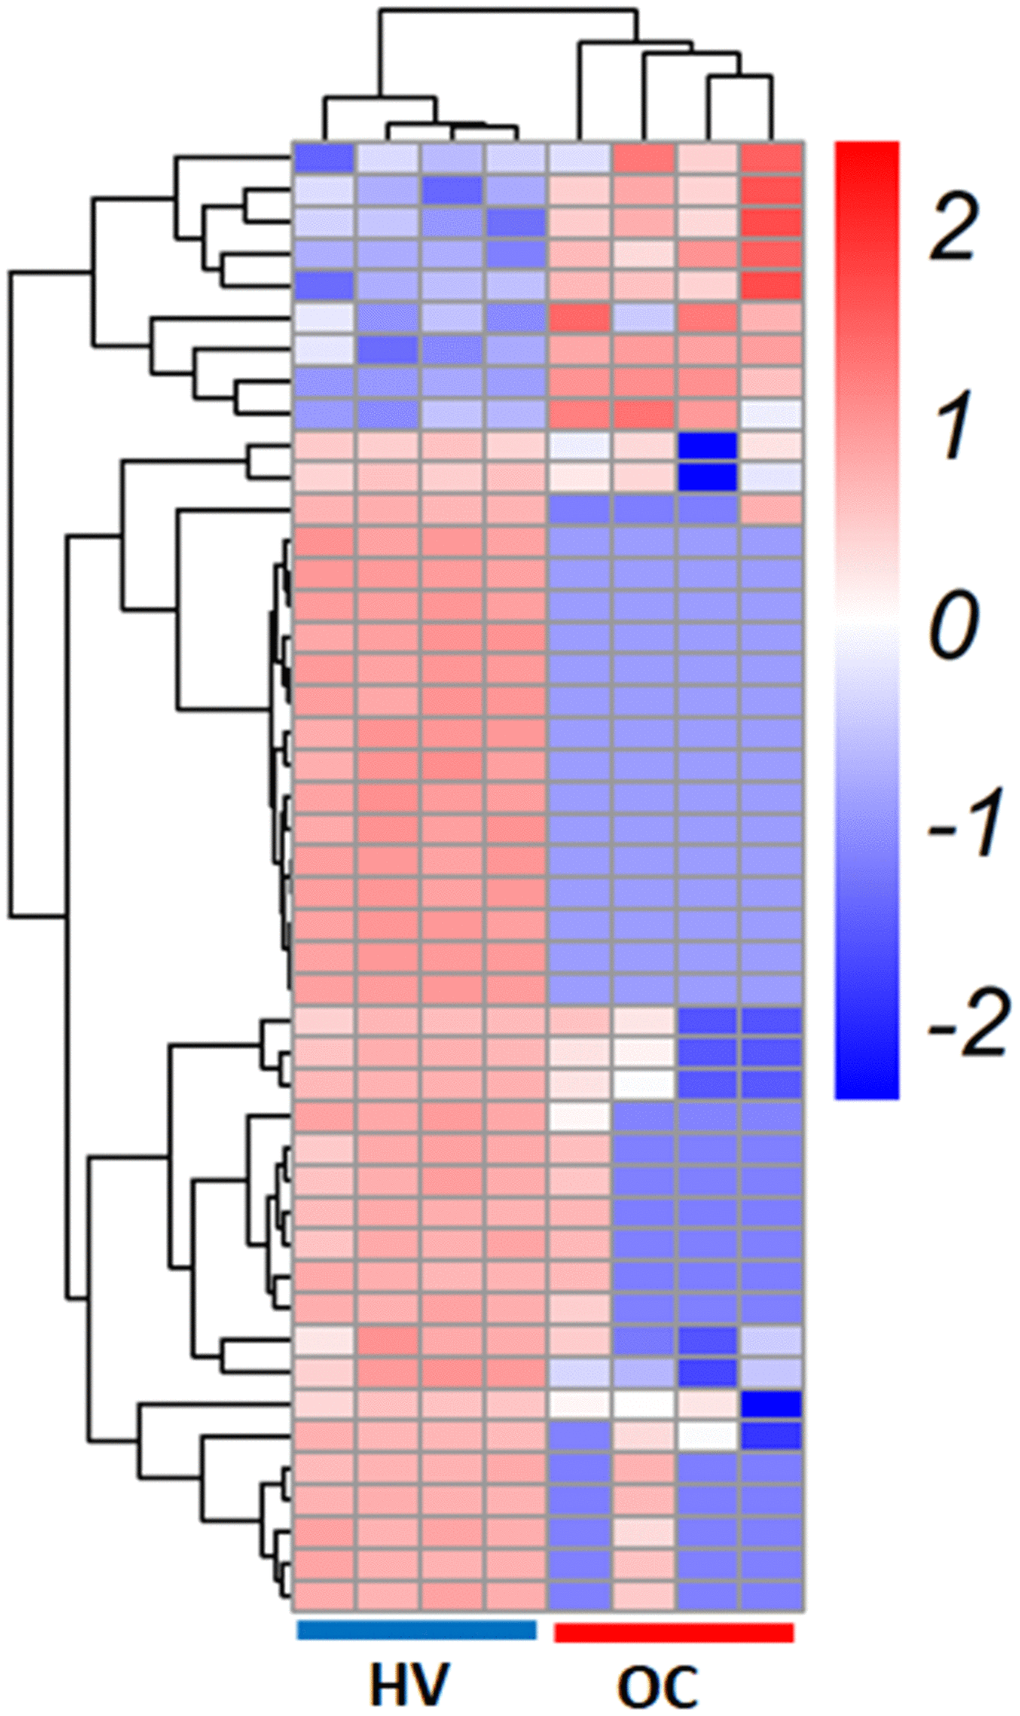 Identification of circRNAs in the serum exosomes from healthy volunteers (HV) and ovarian cancer (OC) patients. Heatmap of circRNAs in serum exosomes from HV and OC patients.